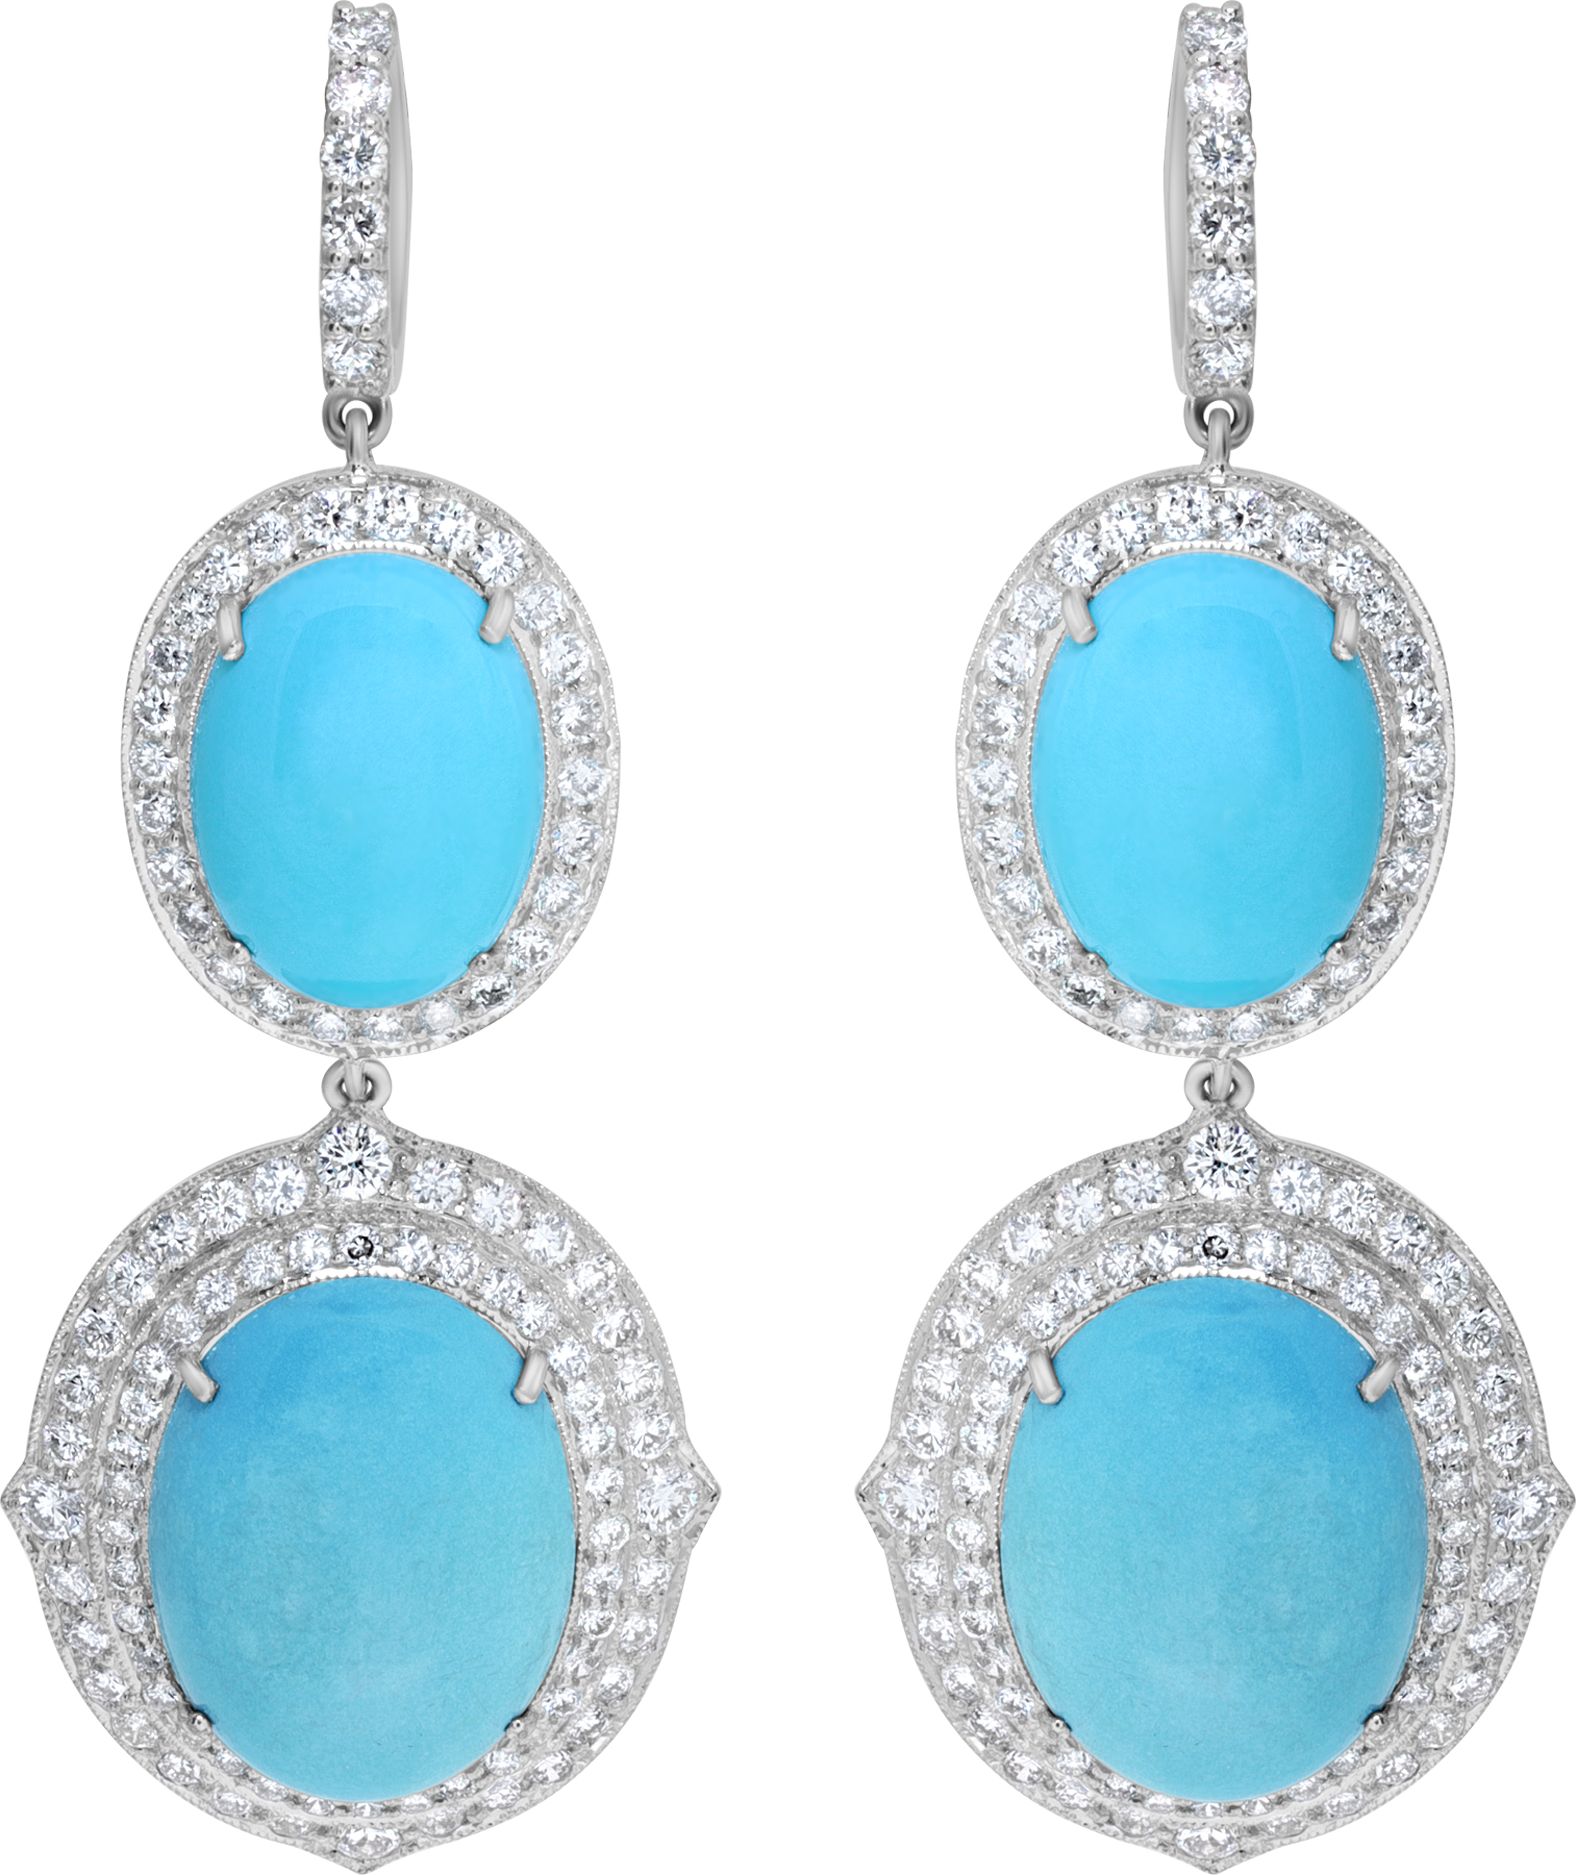 Cabochon Persian Turquoise and diamond earrings in 18k white gold. Cabochon Turquoise total approx. weight: 40.00 carats